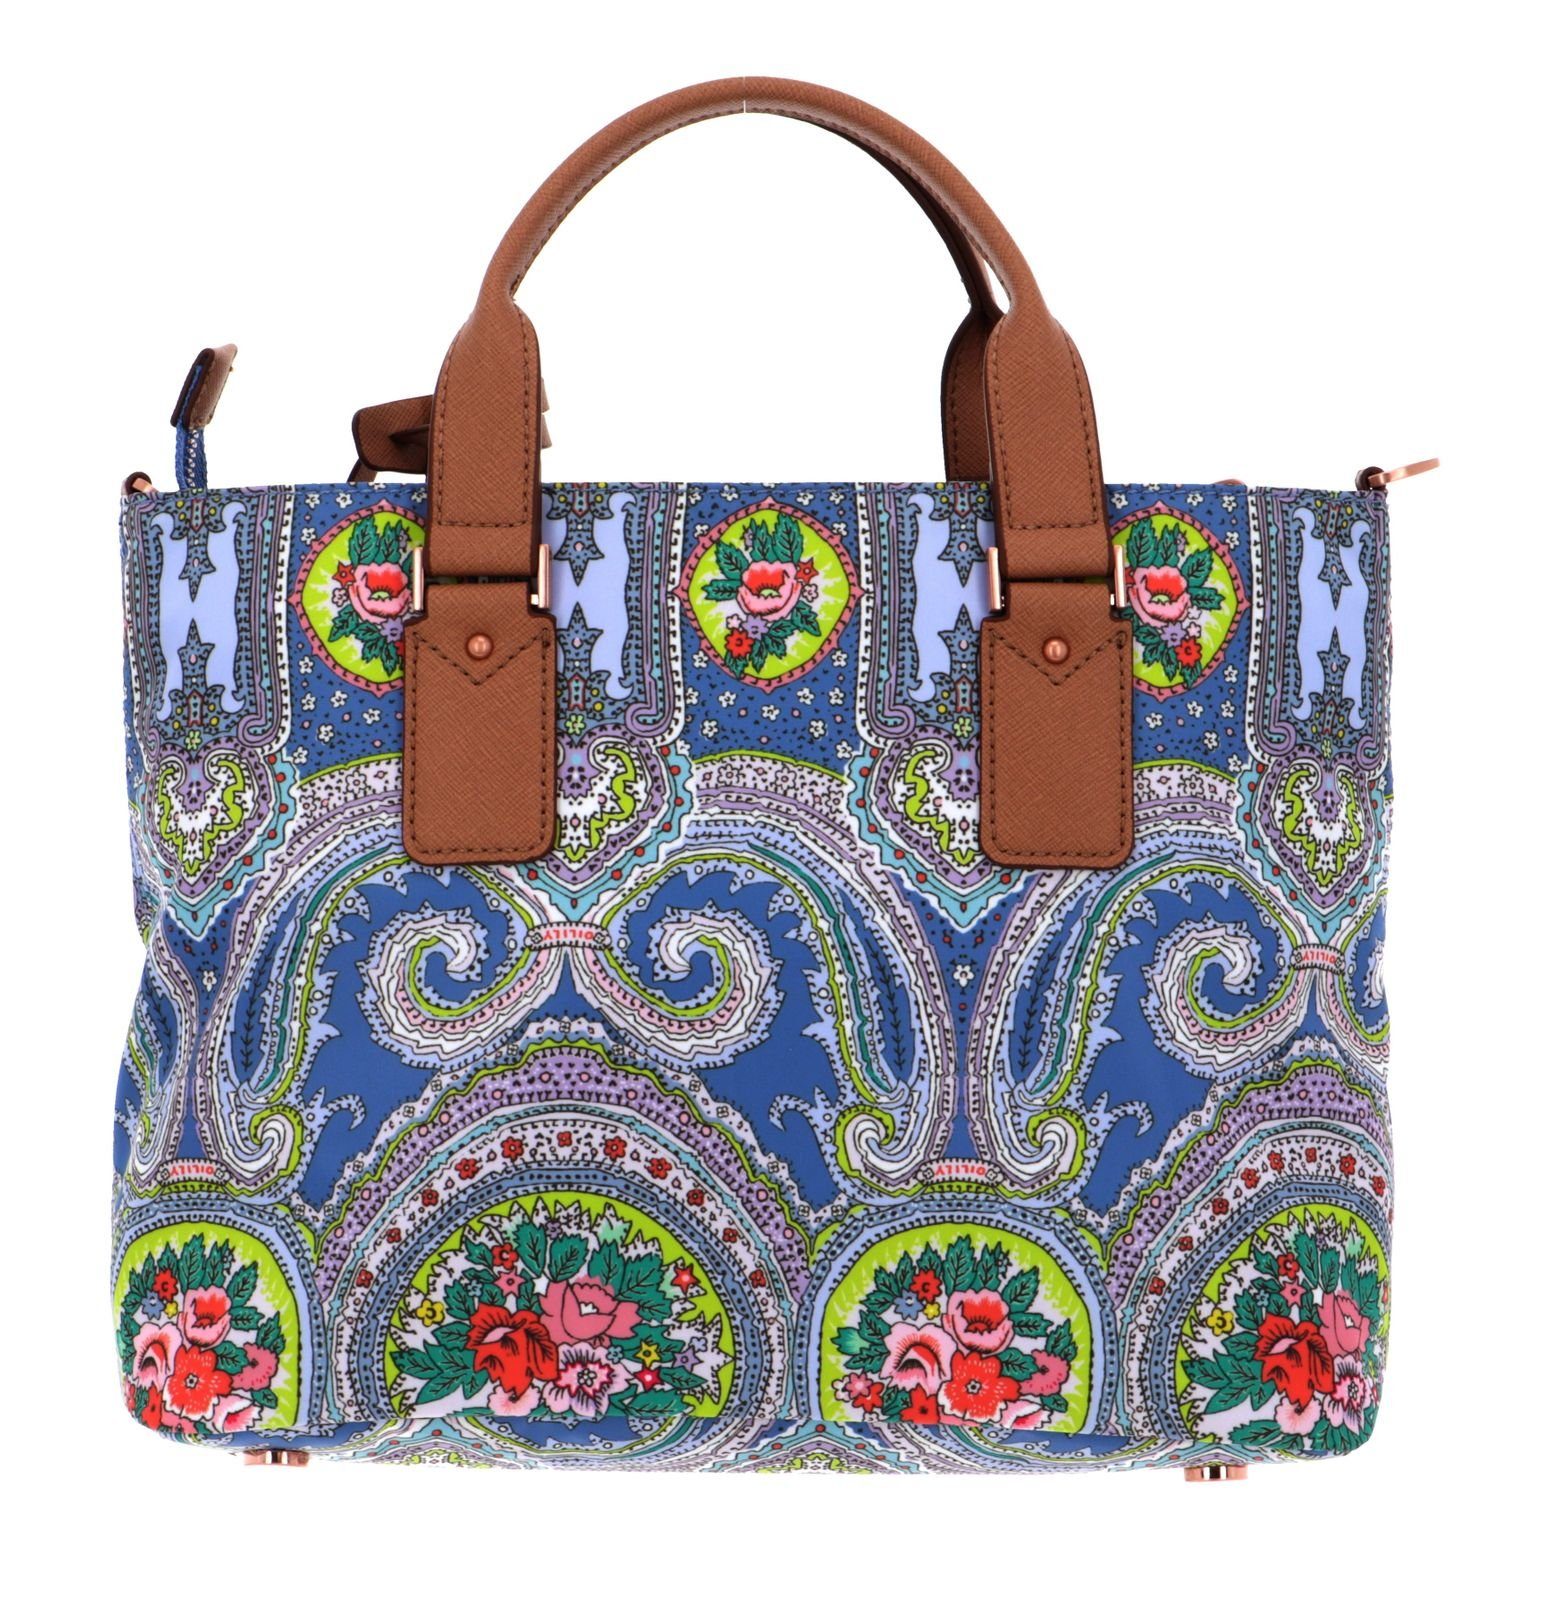 Paisley Rose Handtasche Oilily City Riviera